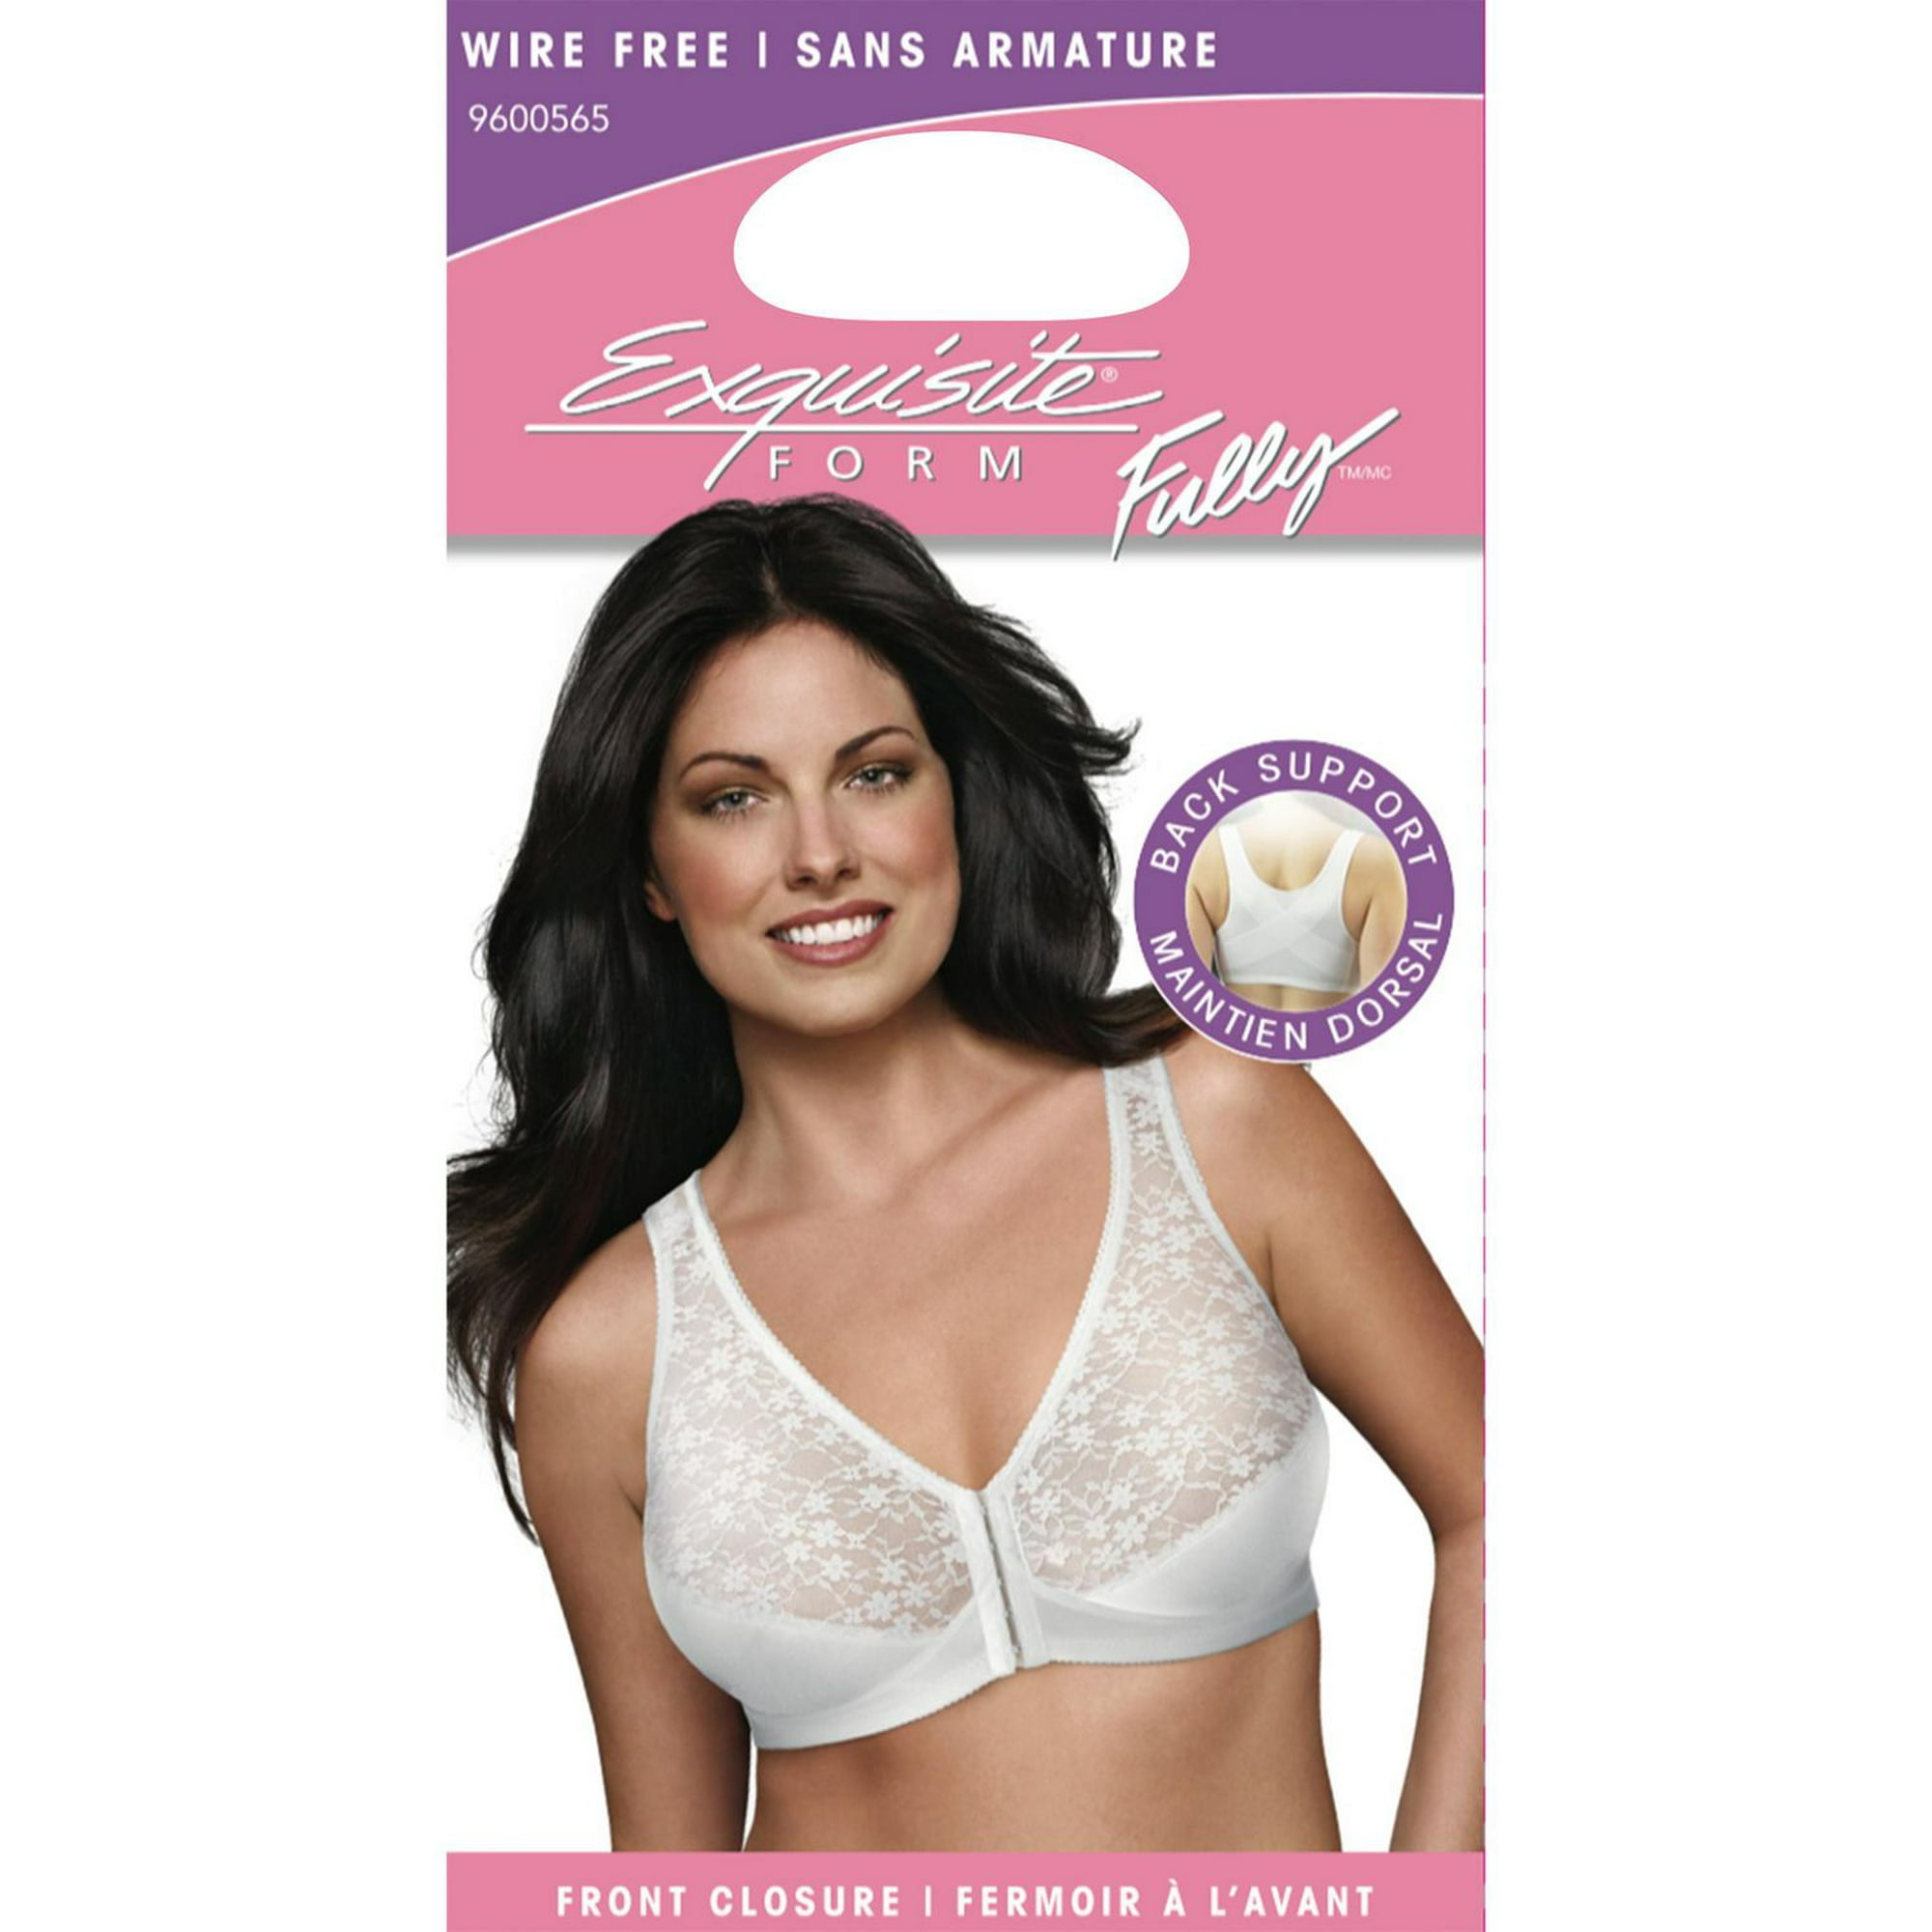 38D Non-Wired Bras - Buy 38d Size Wire-Free Bra Online in India